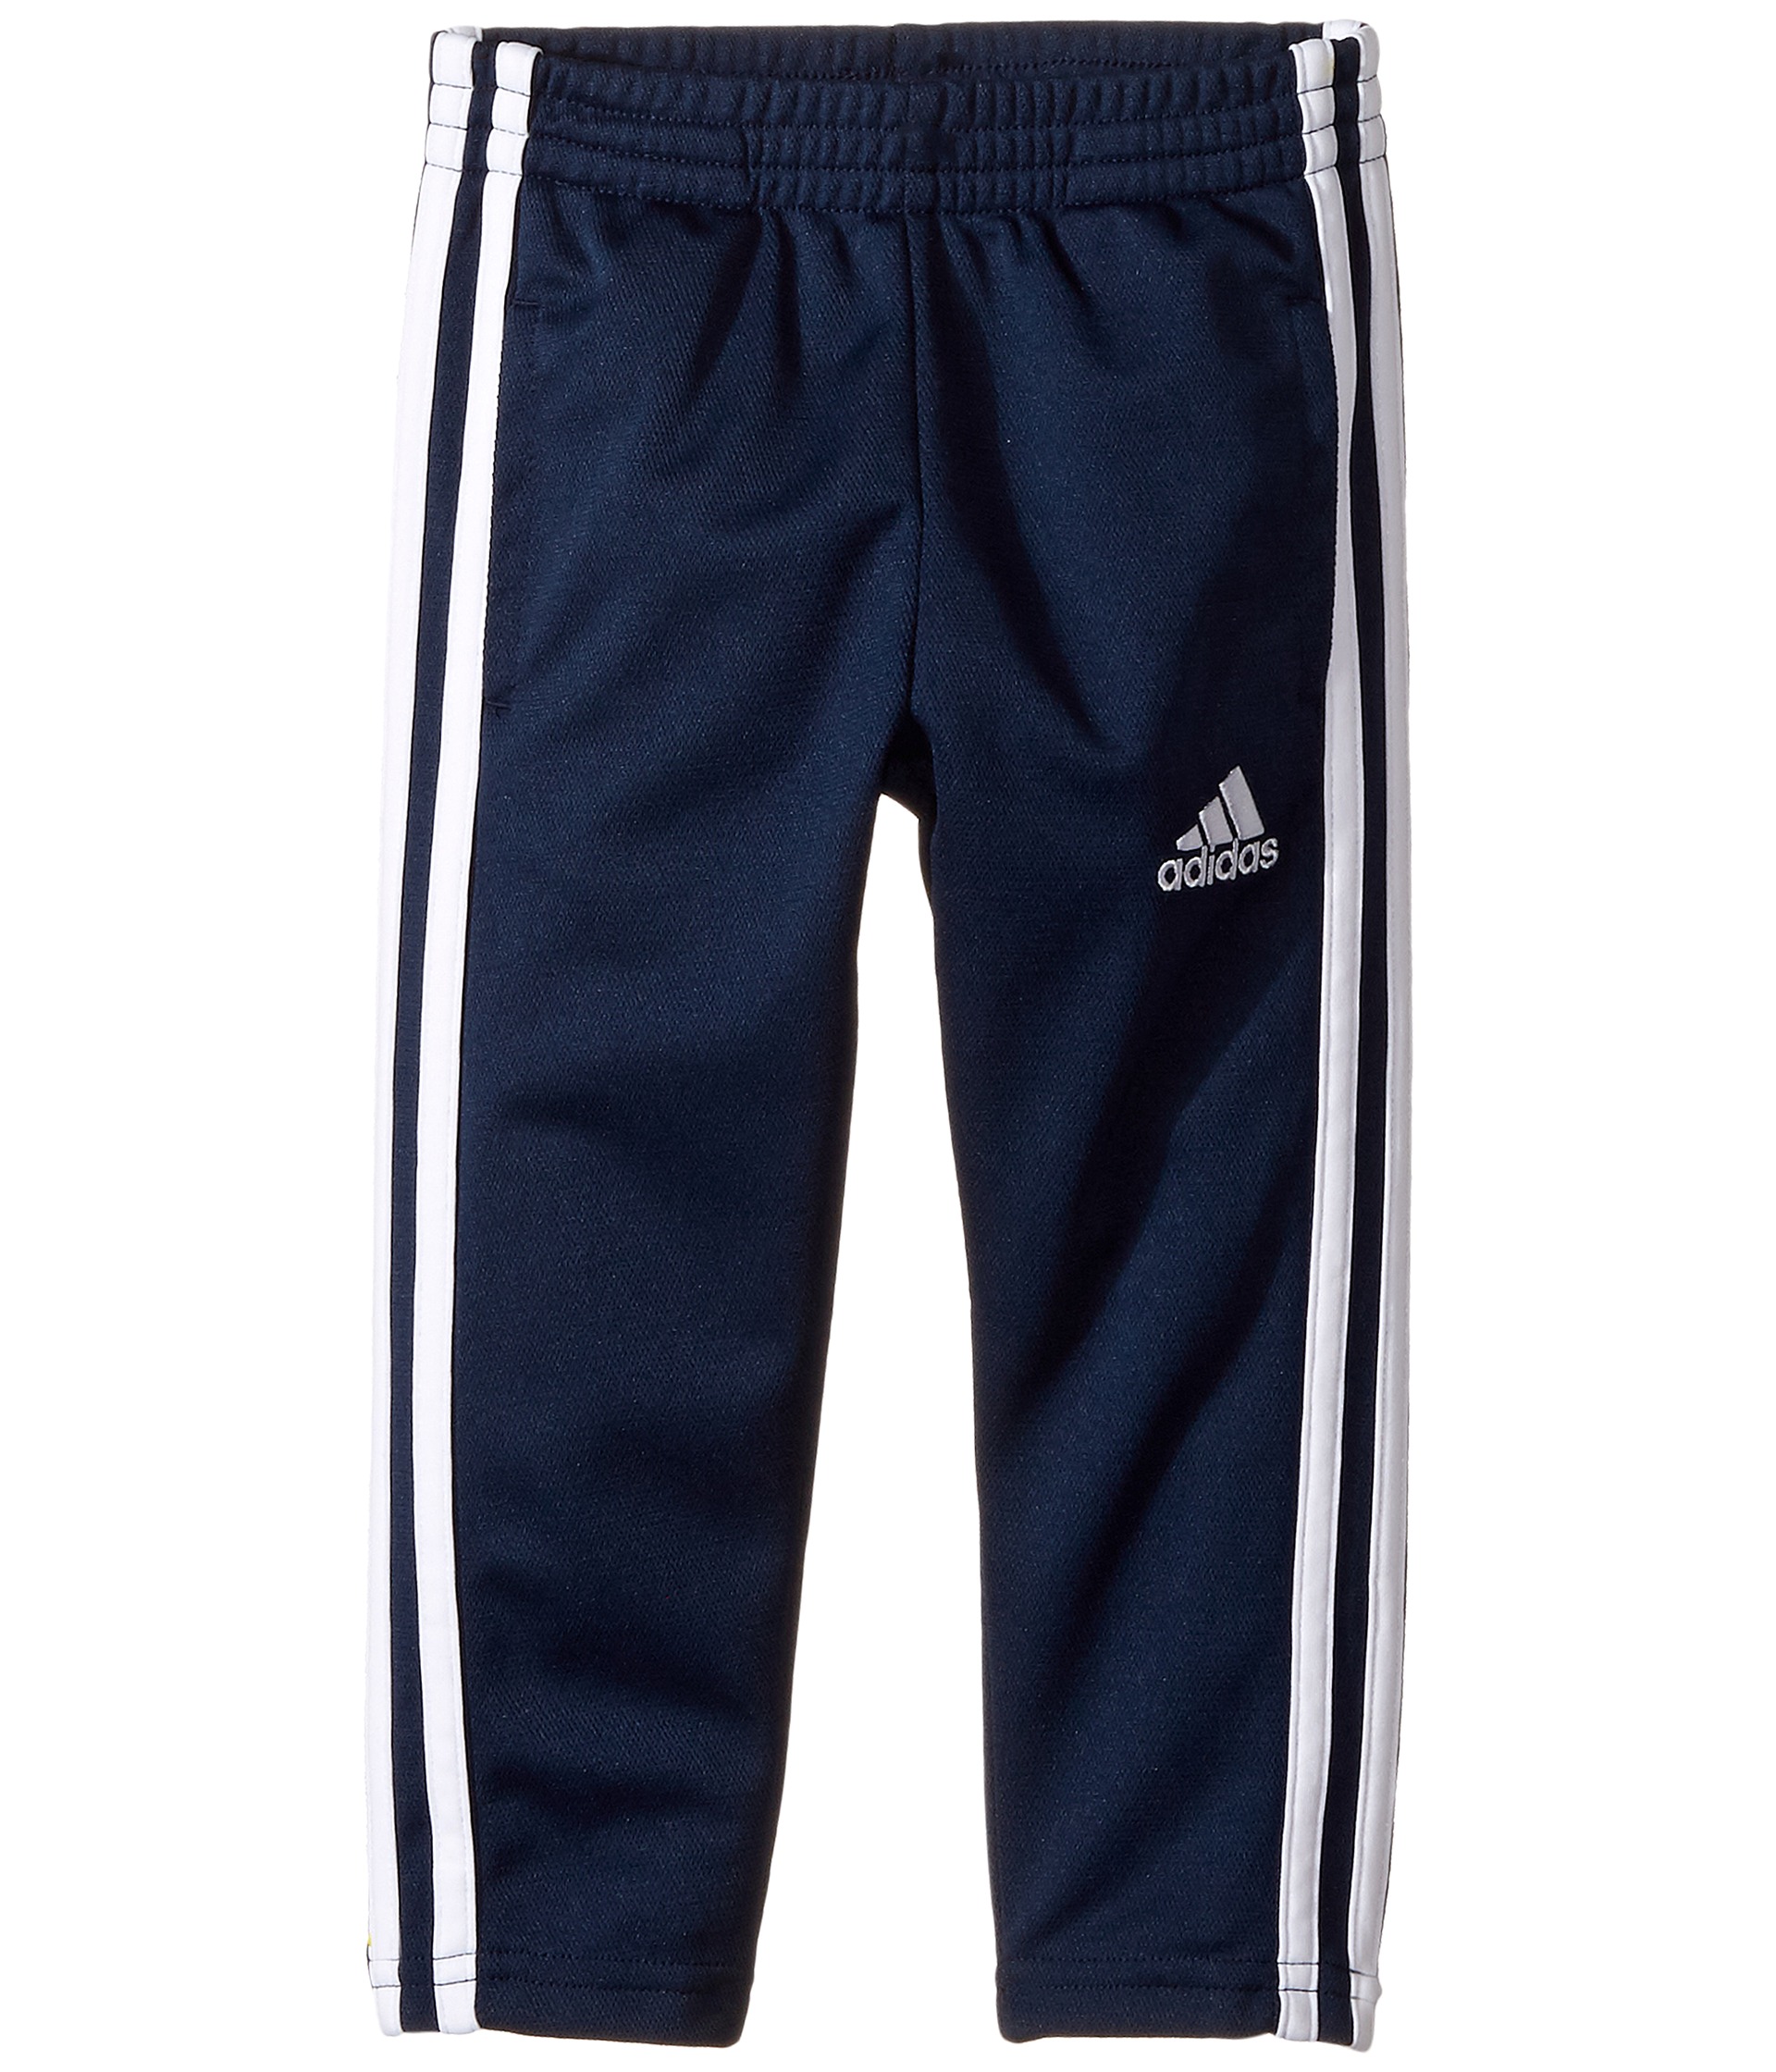 adidas Kids Trainer Pants (Toddler/Little Kids) at Zappos.com